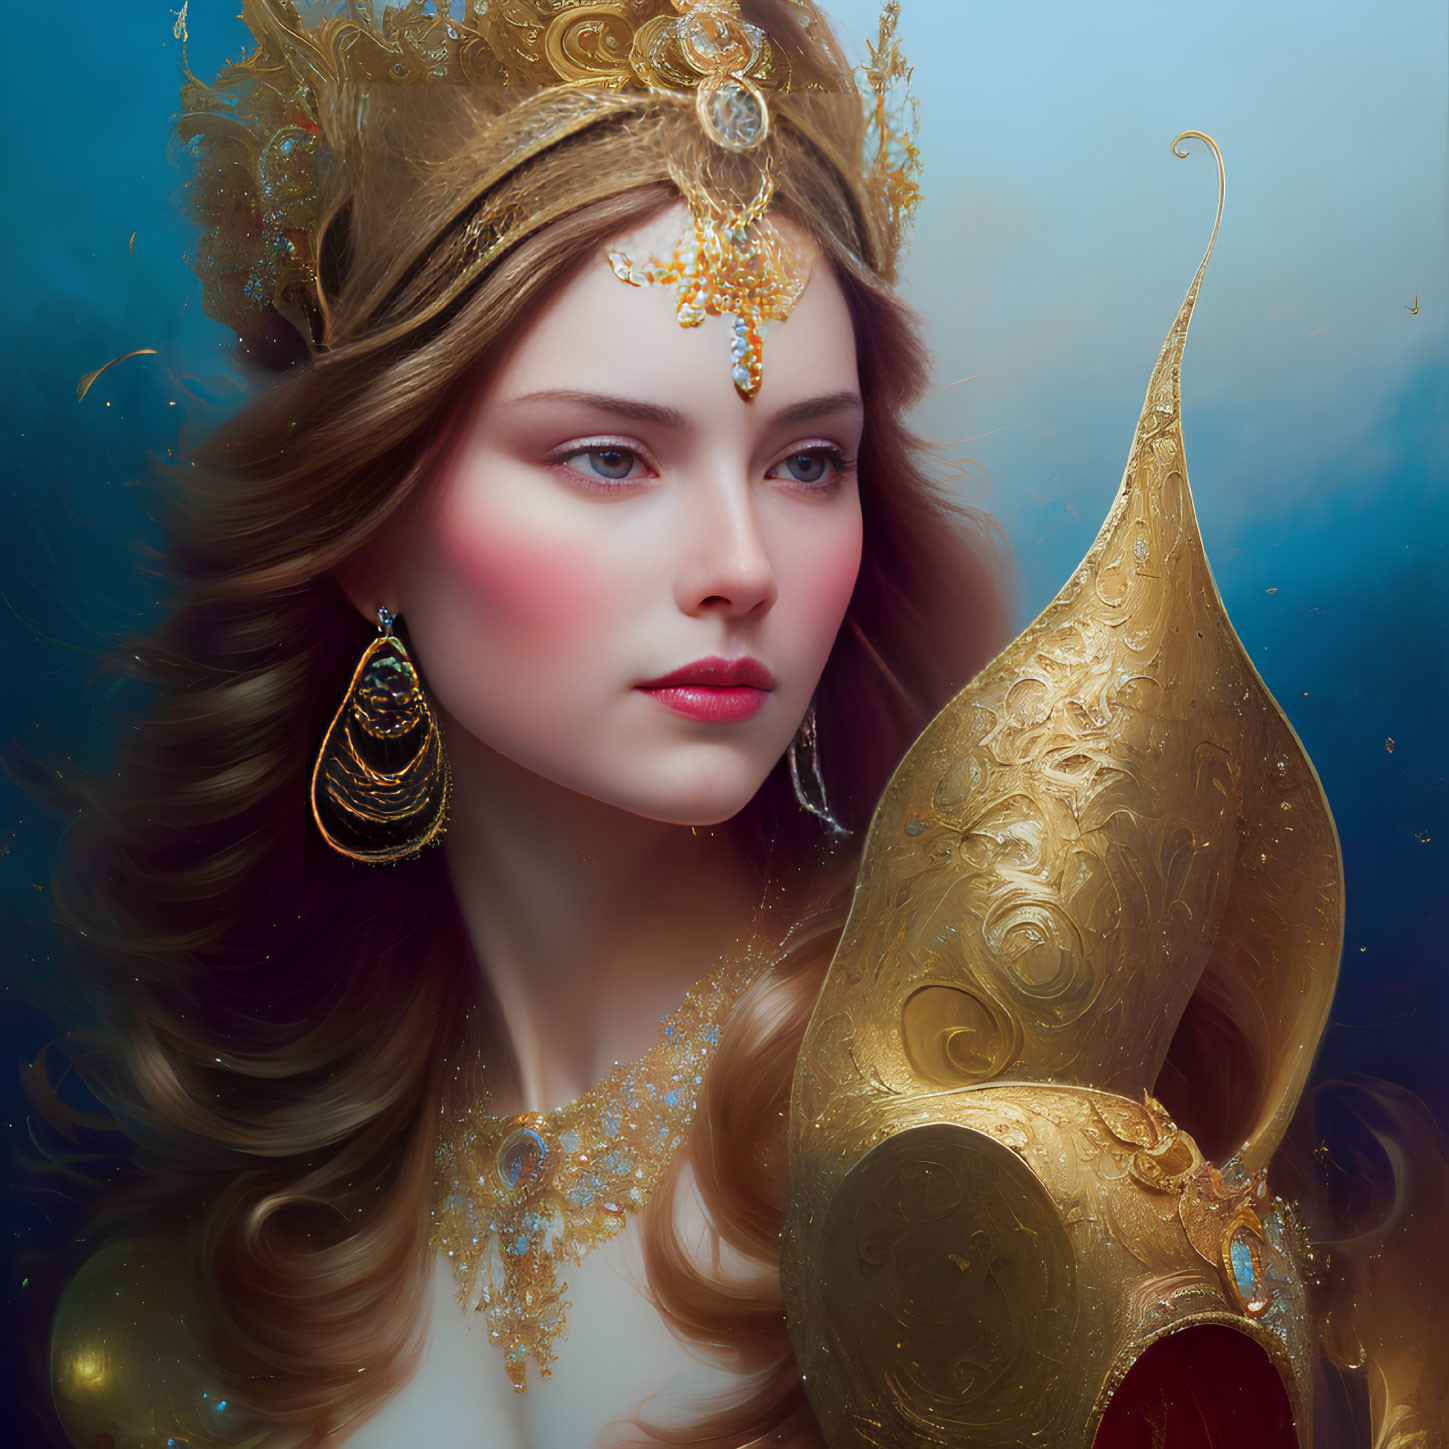 Golden-crowned woman with wavy hair and jewelry on blue background